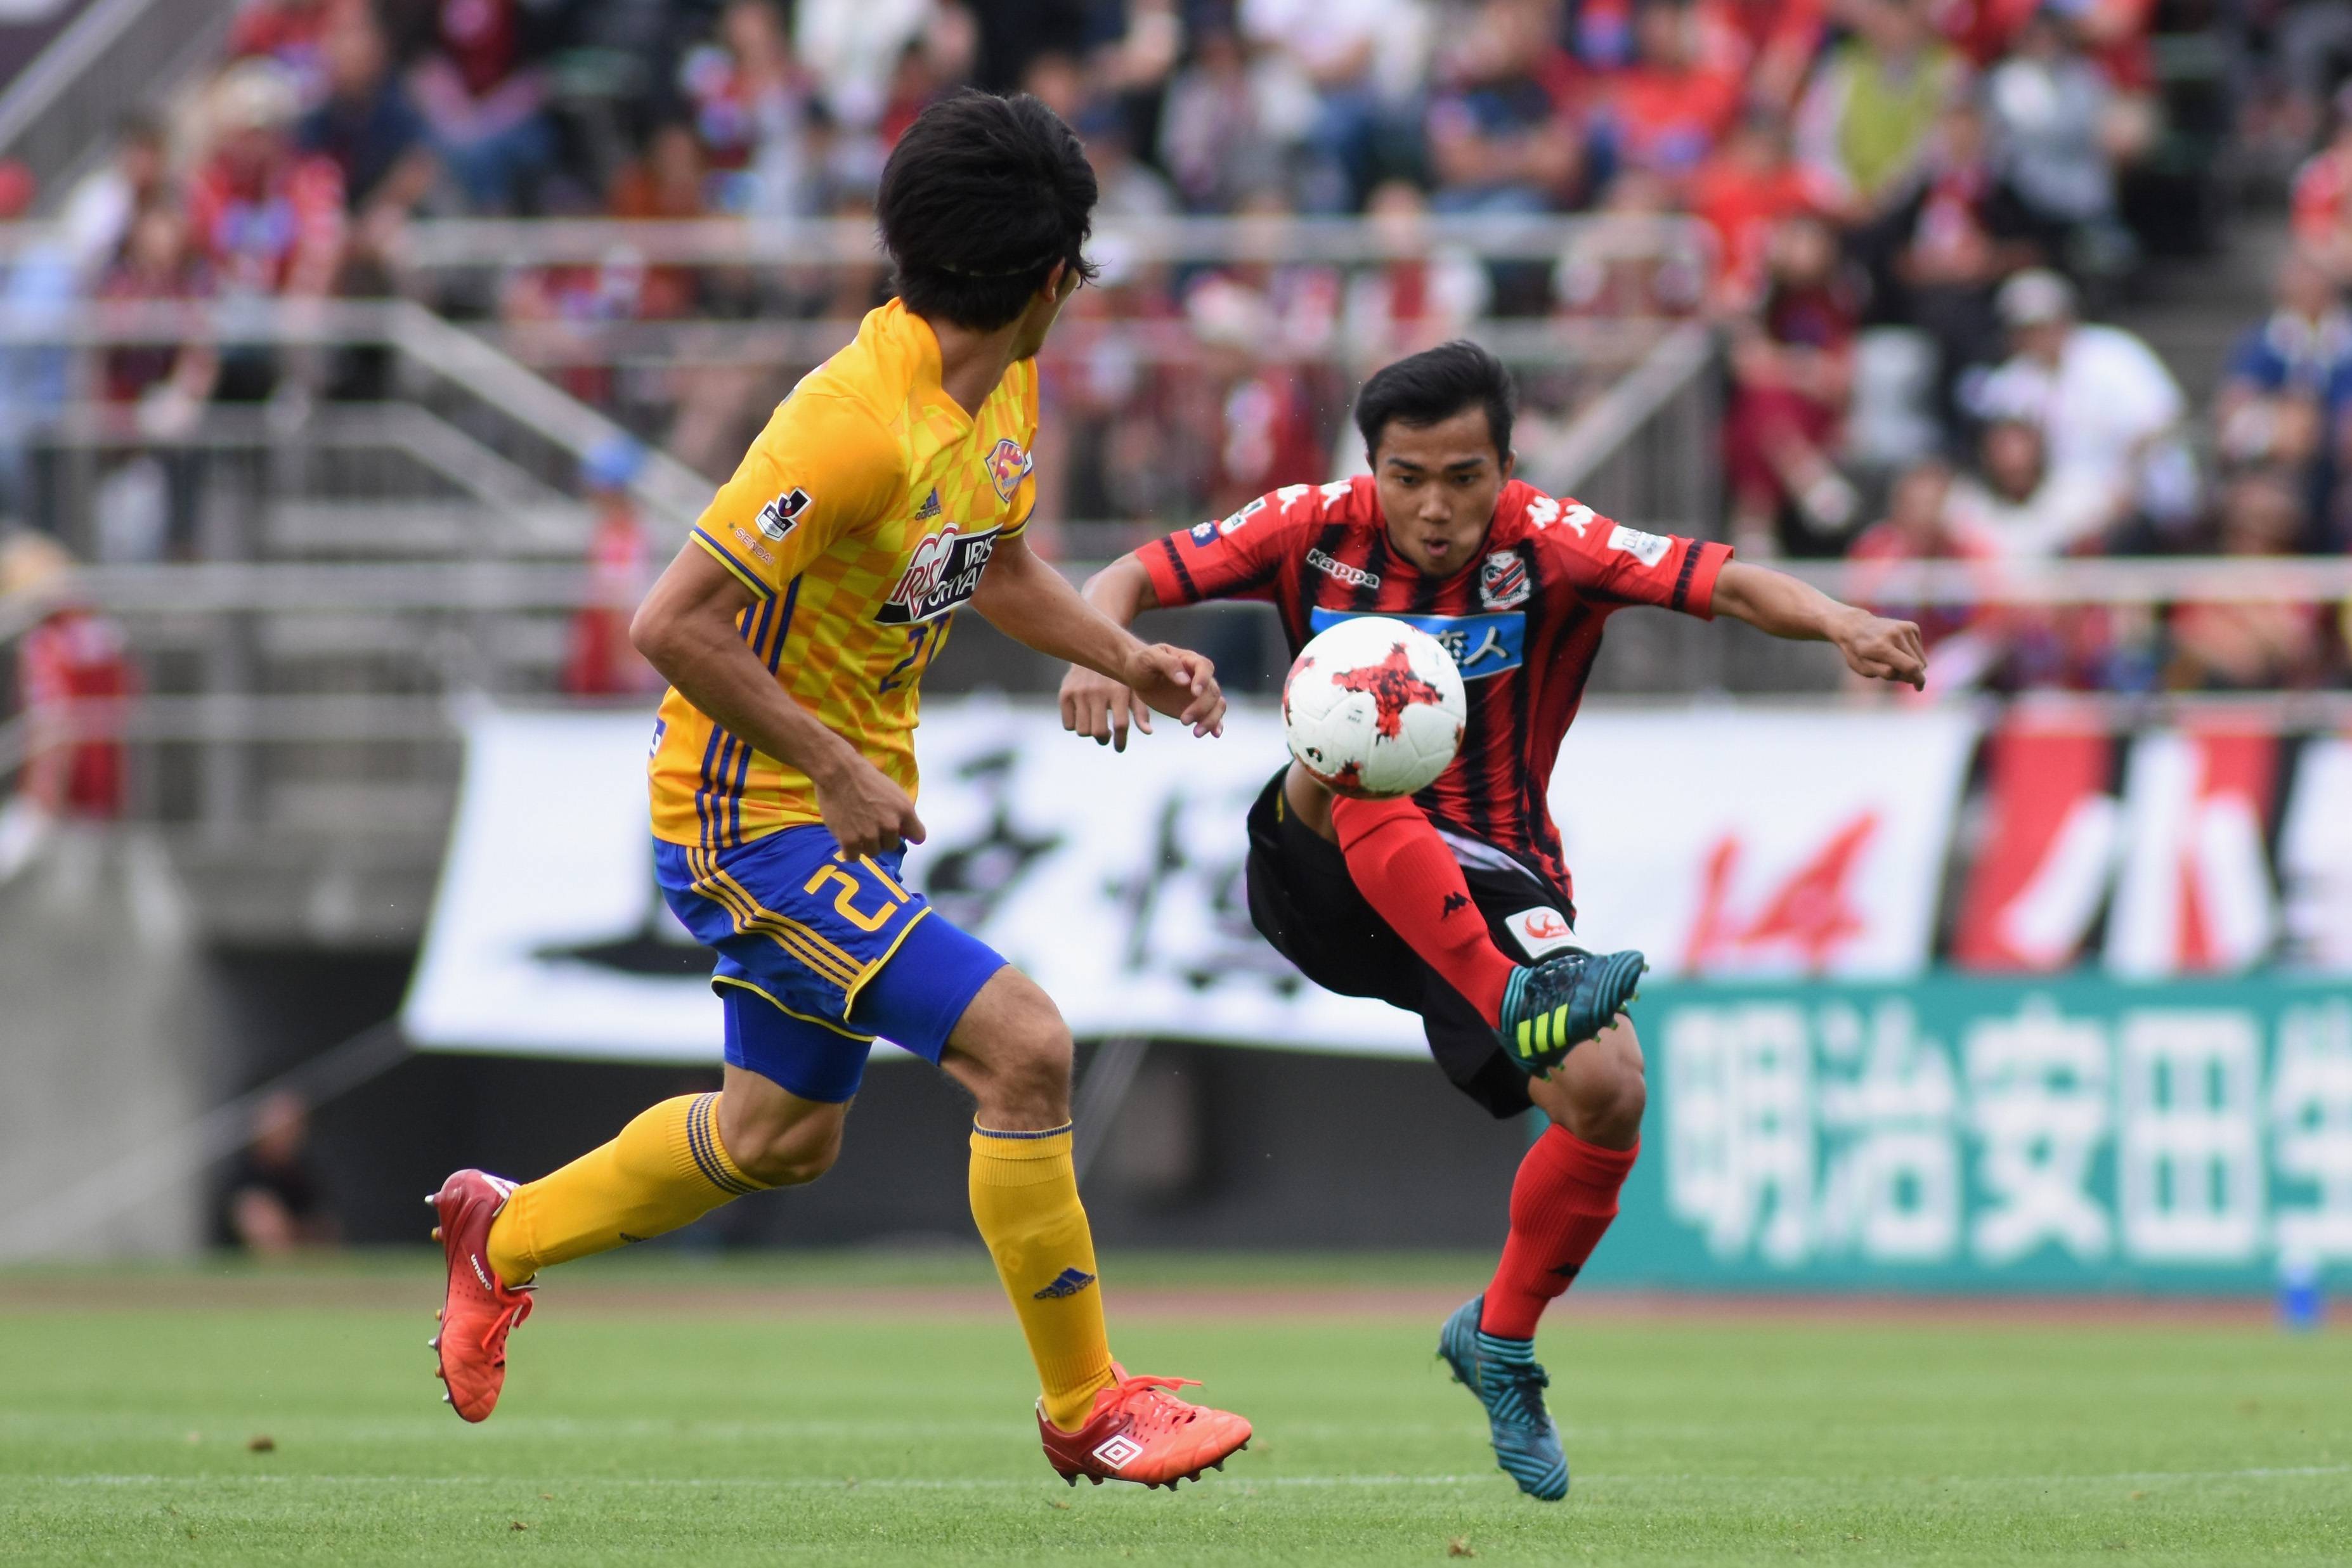 Chanathip’s New Year’s resolutions: first J.League goal, ACL qualification for Consadole